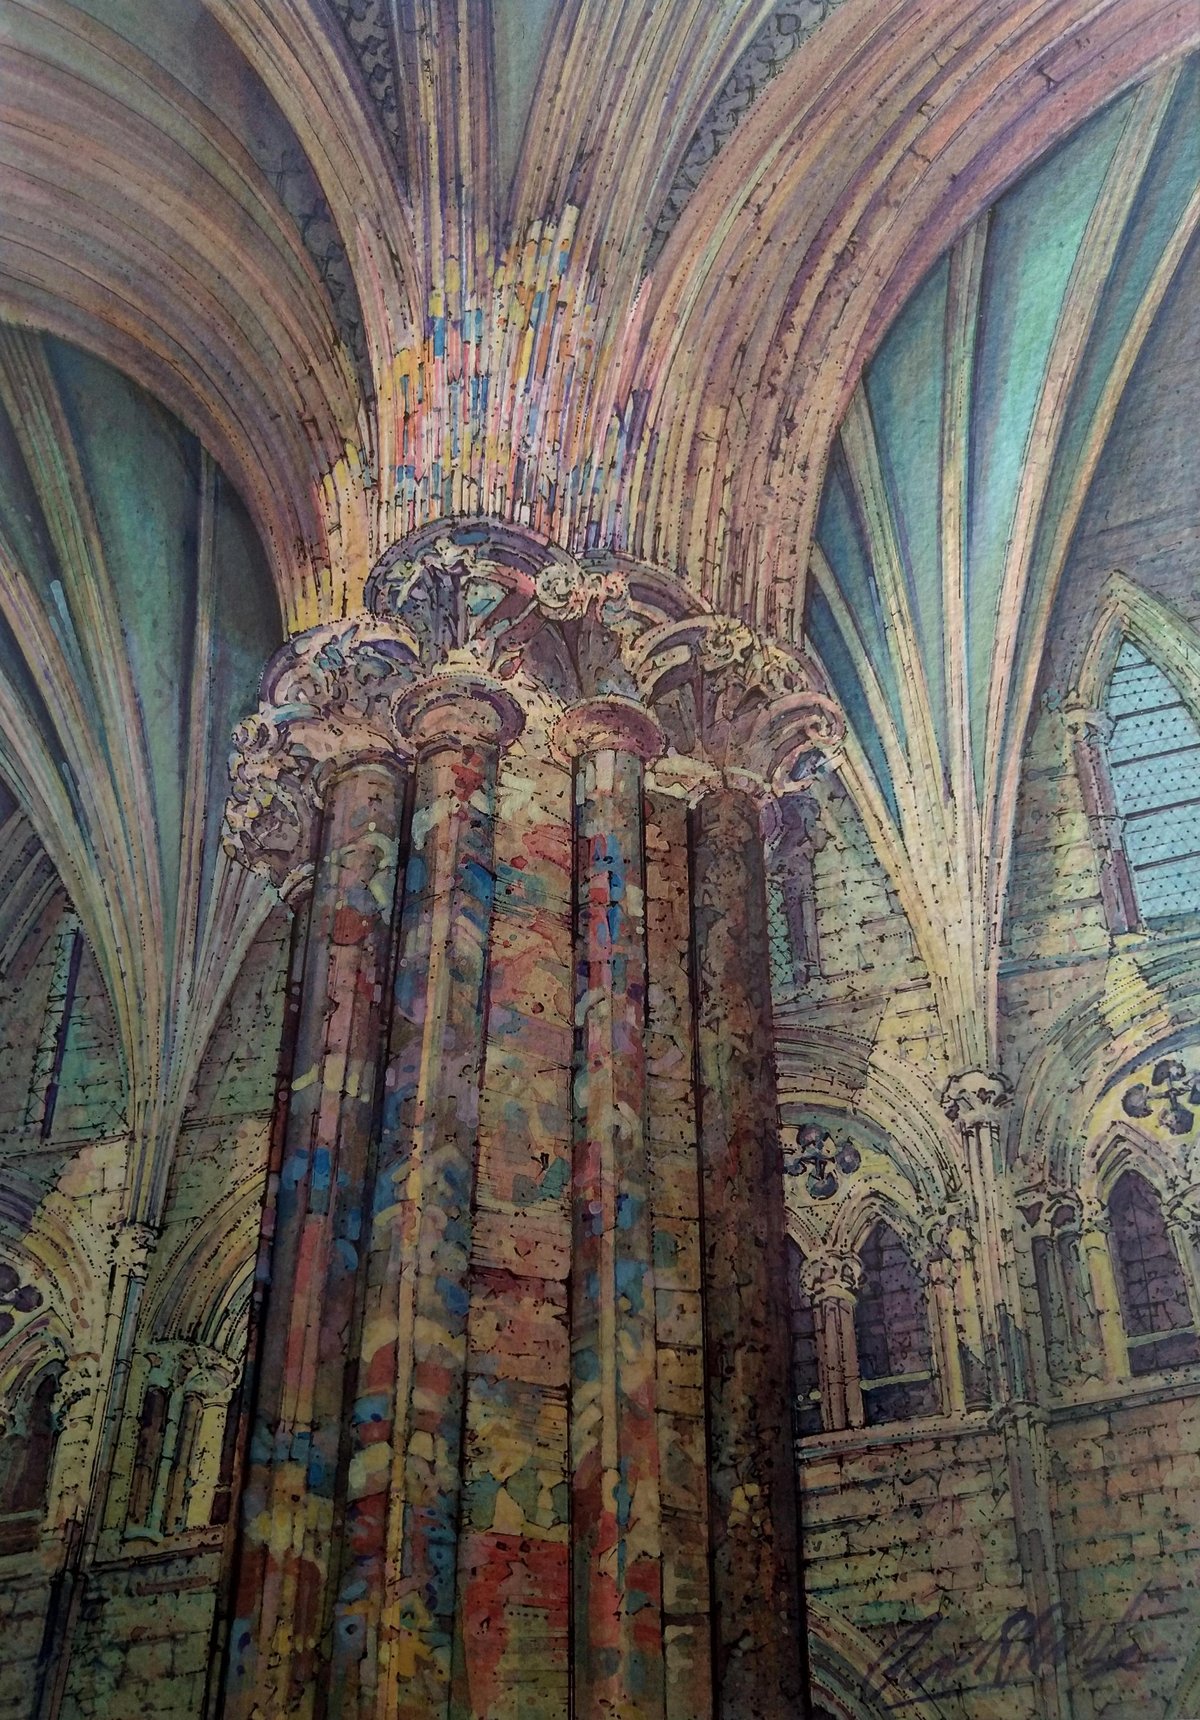 Carl Paul "Stained Glass Reflections, Nave, Lincoln Cathedral"